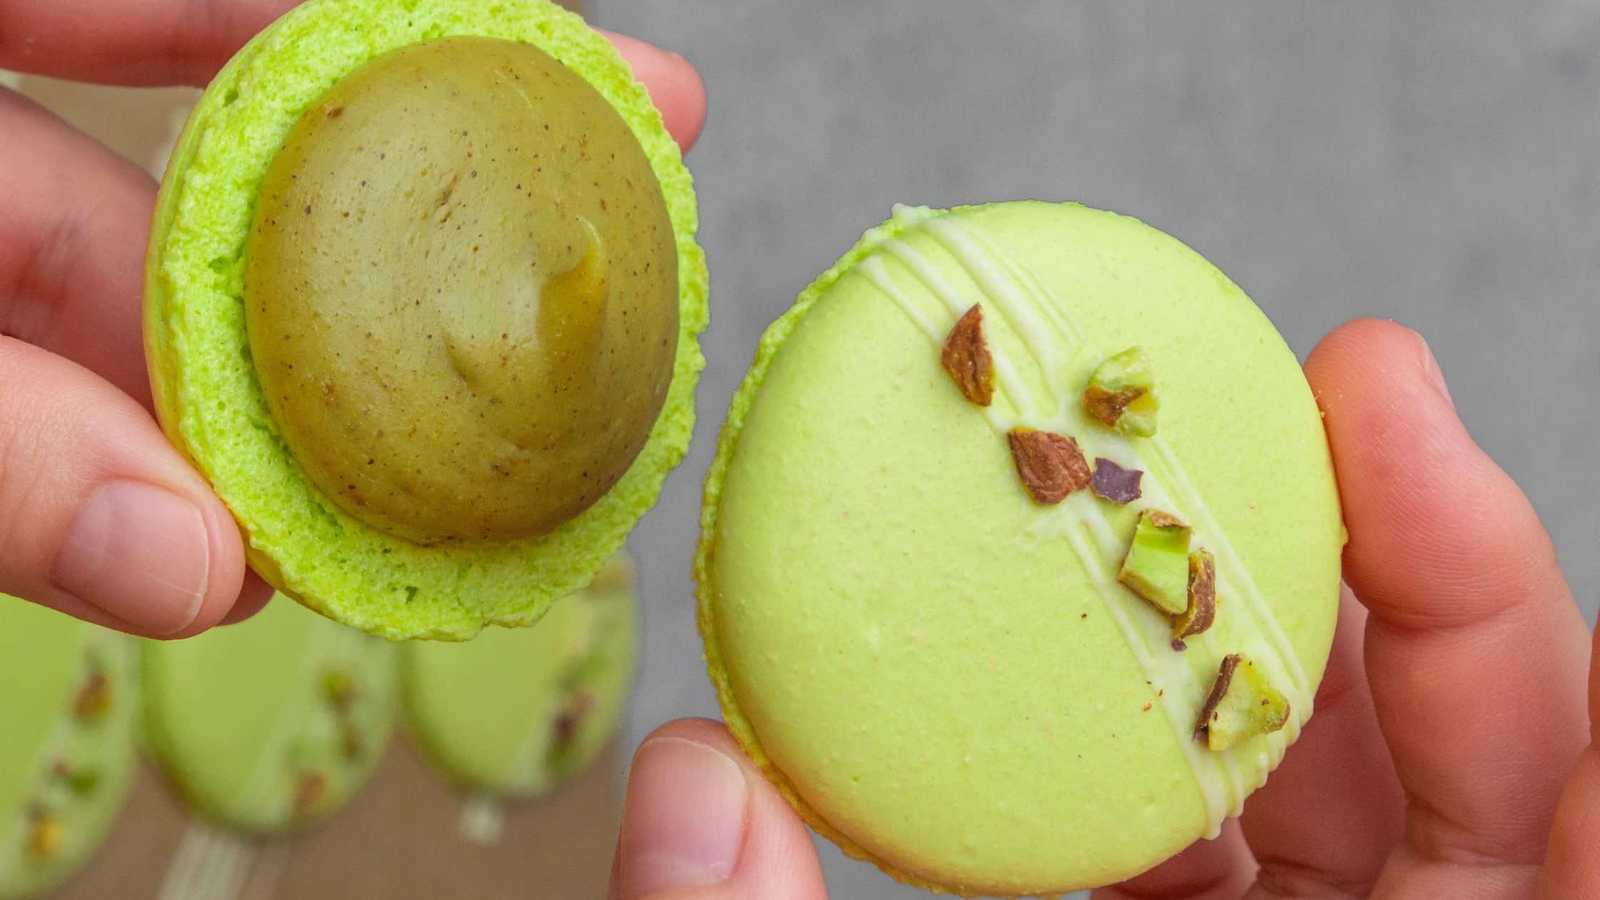 Vibrant green macarons garnished with pistachios.